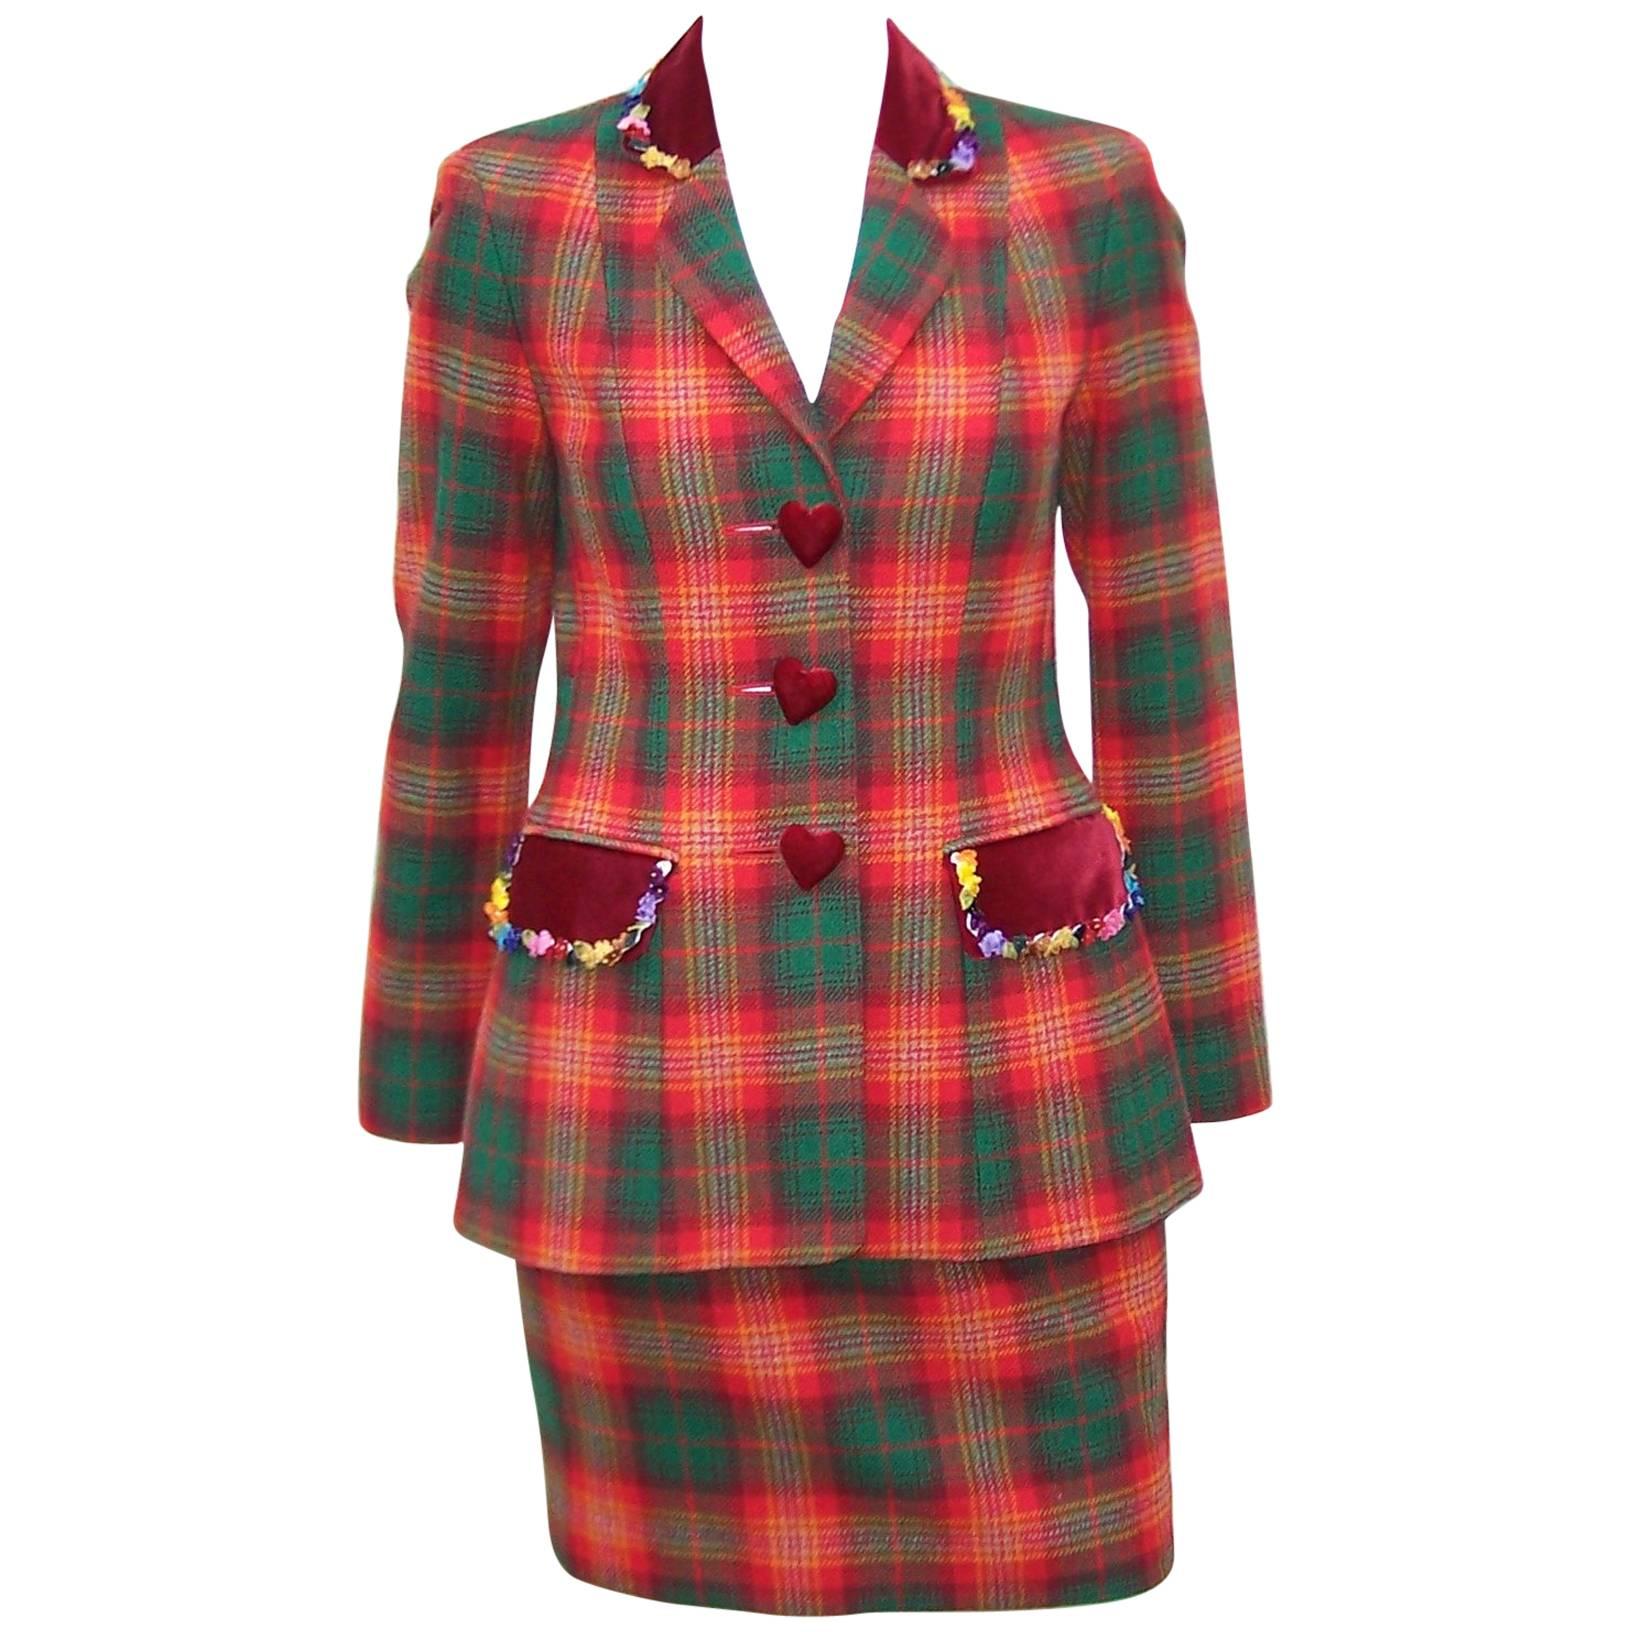 Adorable 1990's Moschino Plaid Skirt Suit With Velvet Heart Buttons